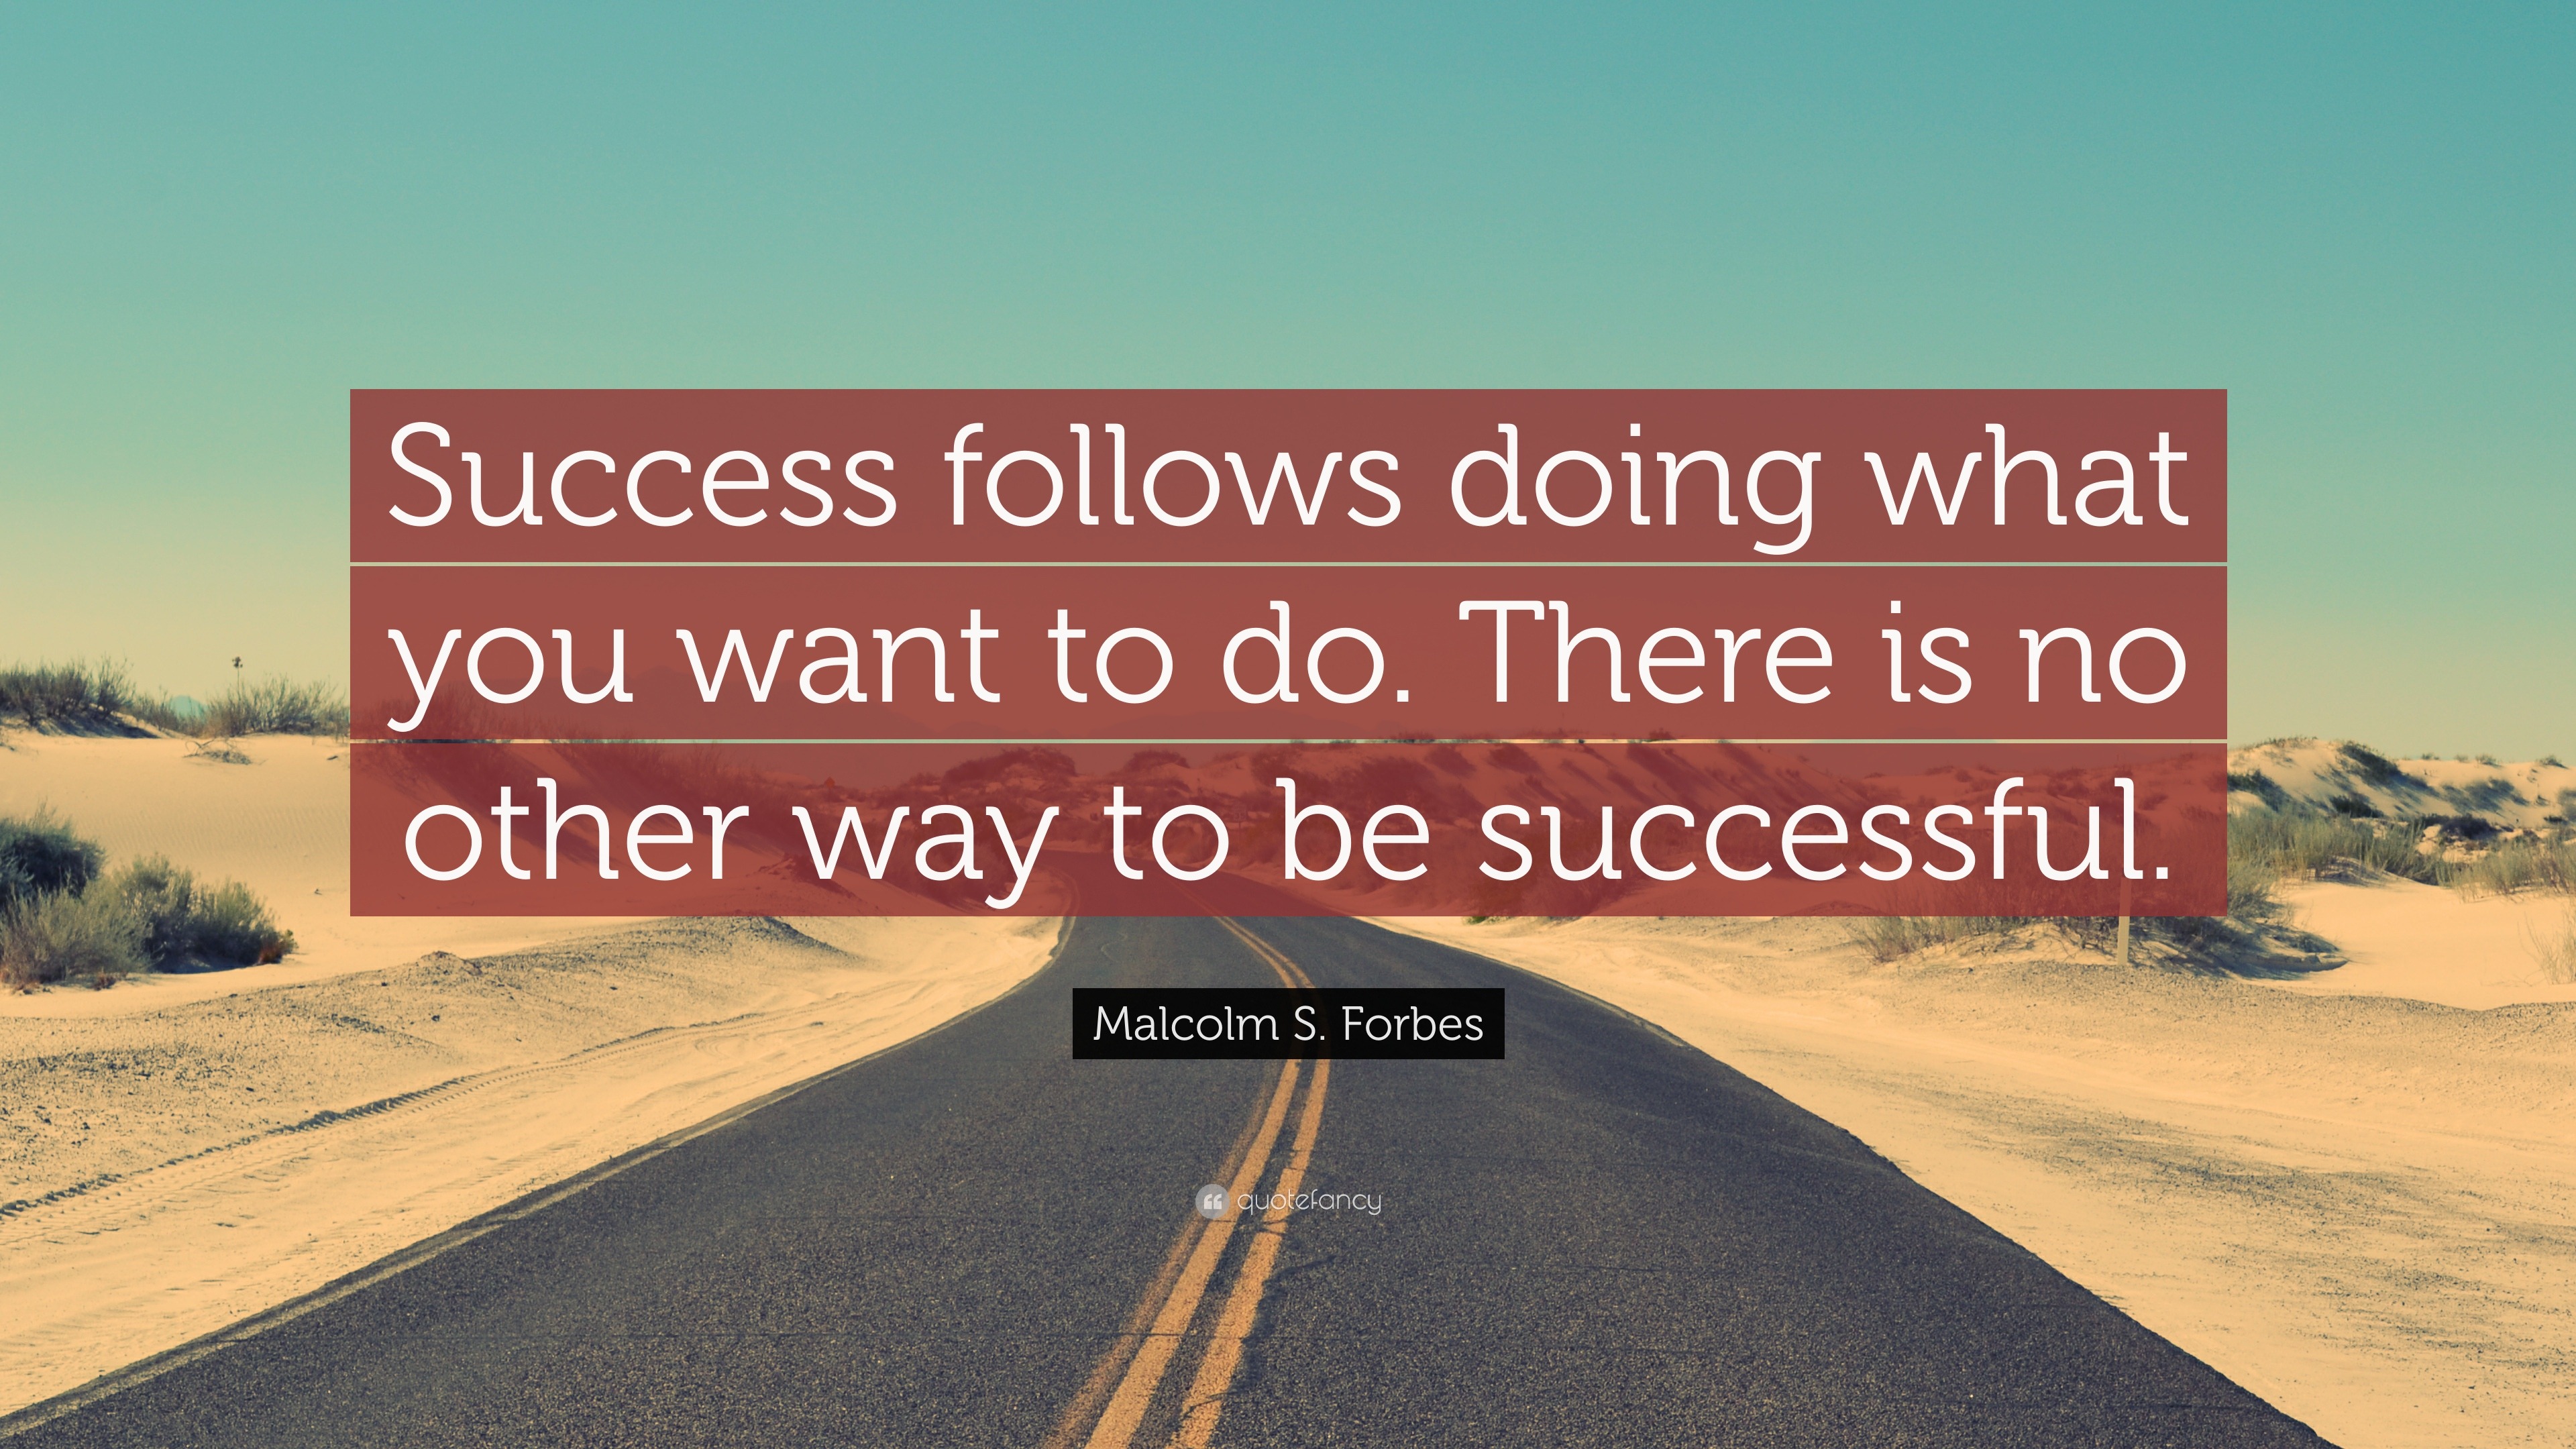 Malcolm S Forbes Quote Success Follows Doing What You Want To Do There Is No Other